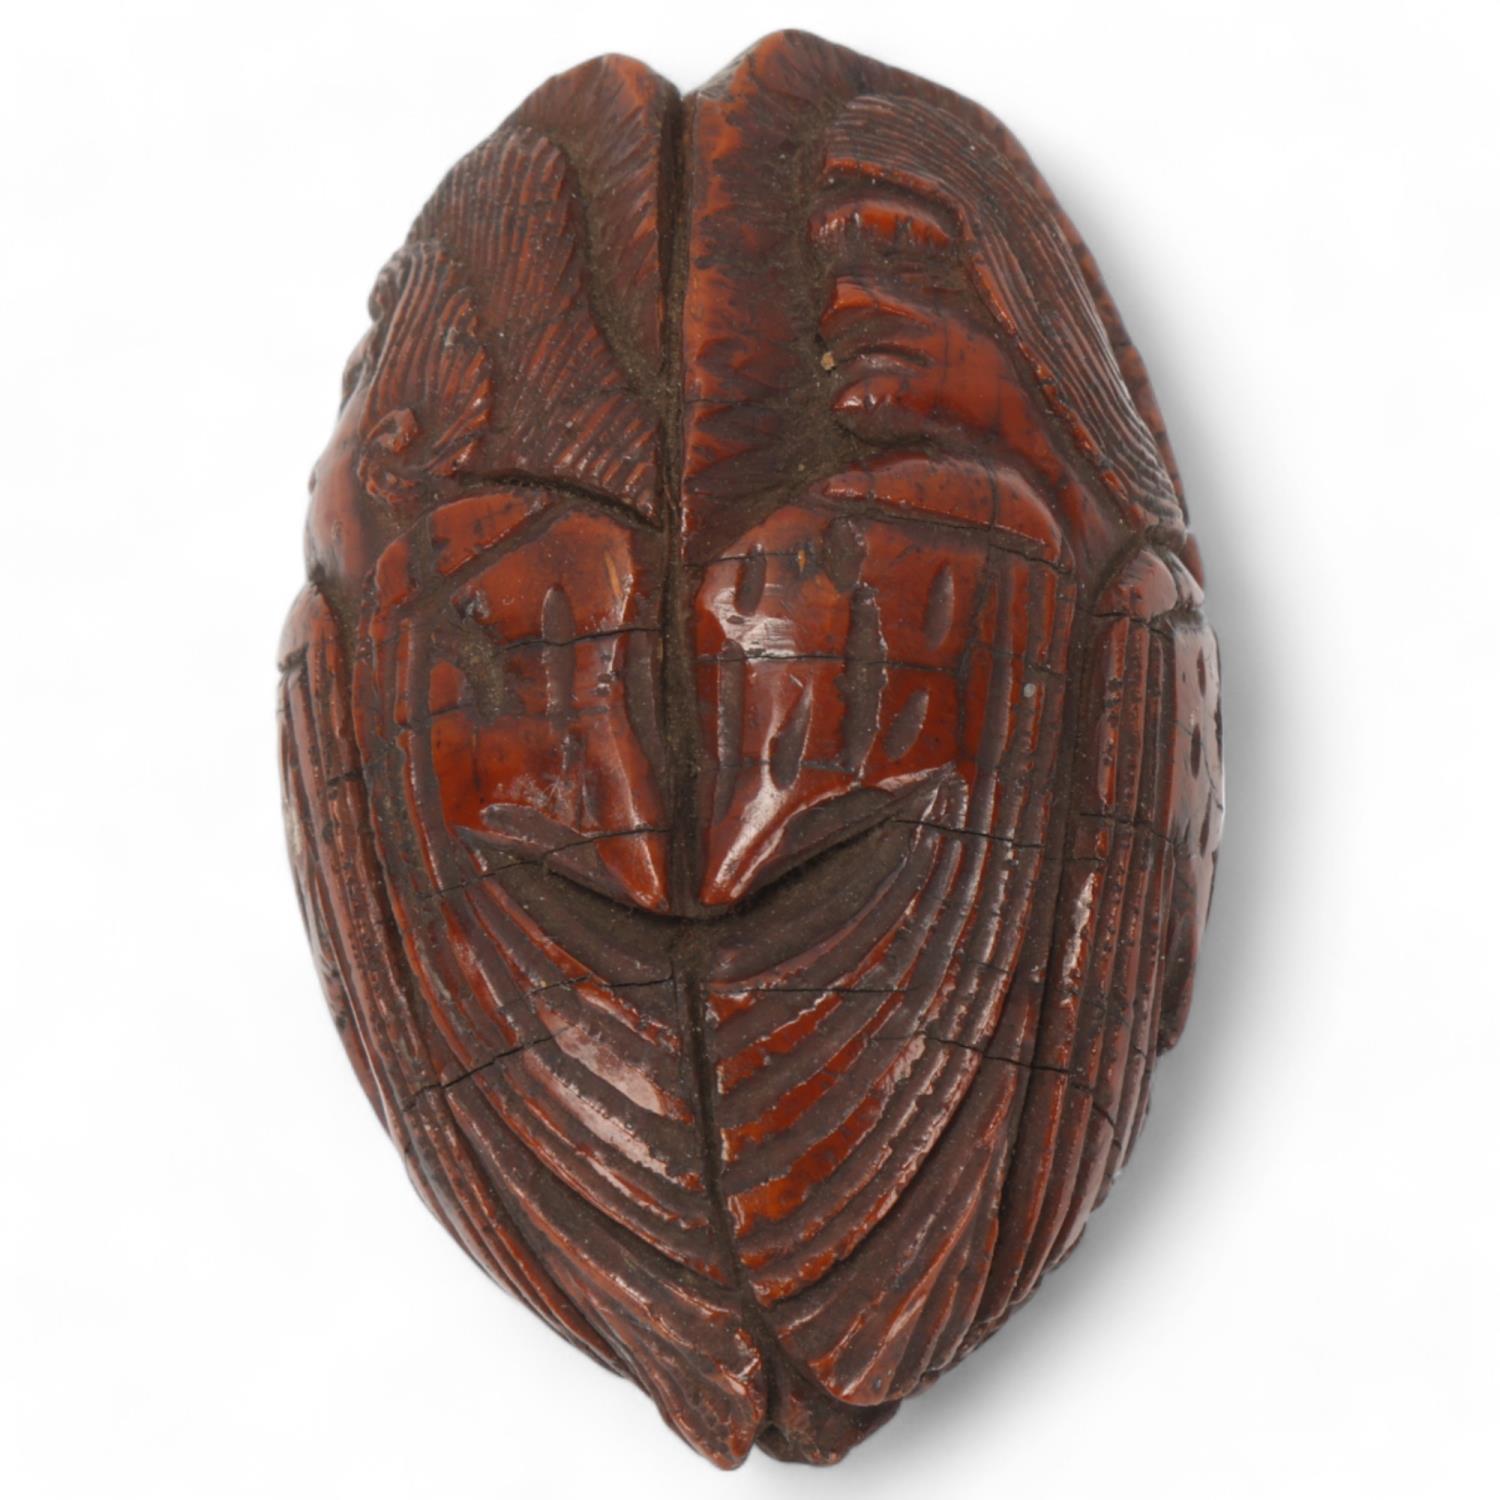 19th century coquilla nut, relief carved all round with portraits of men, length 6.5cm Several age-